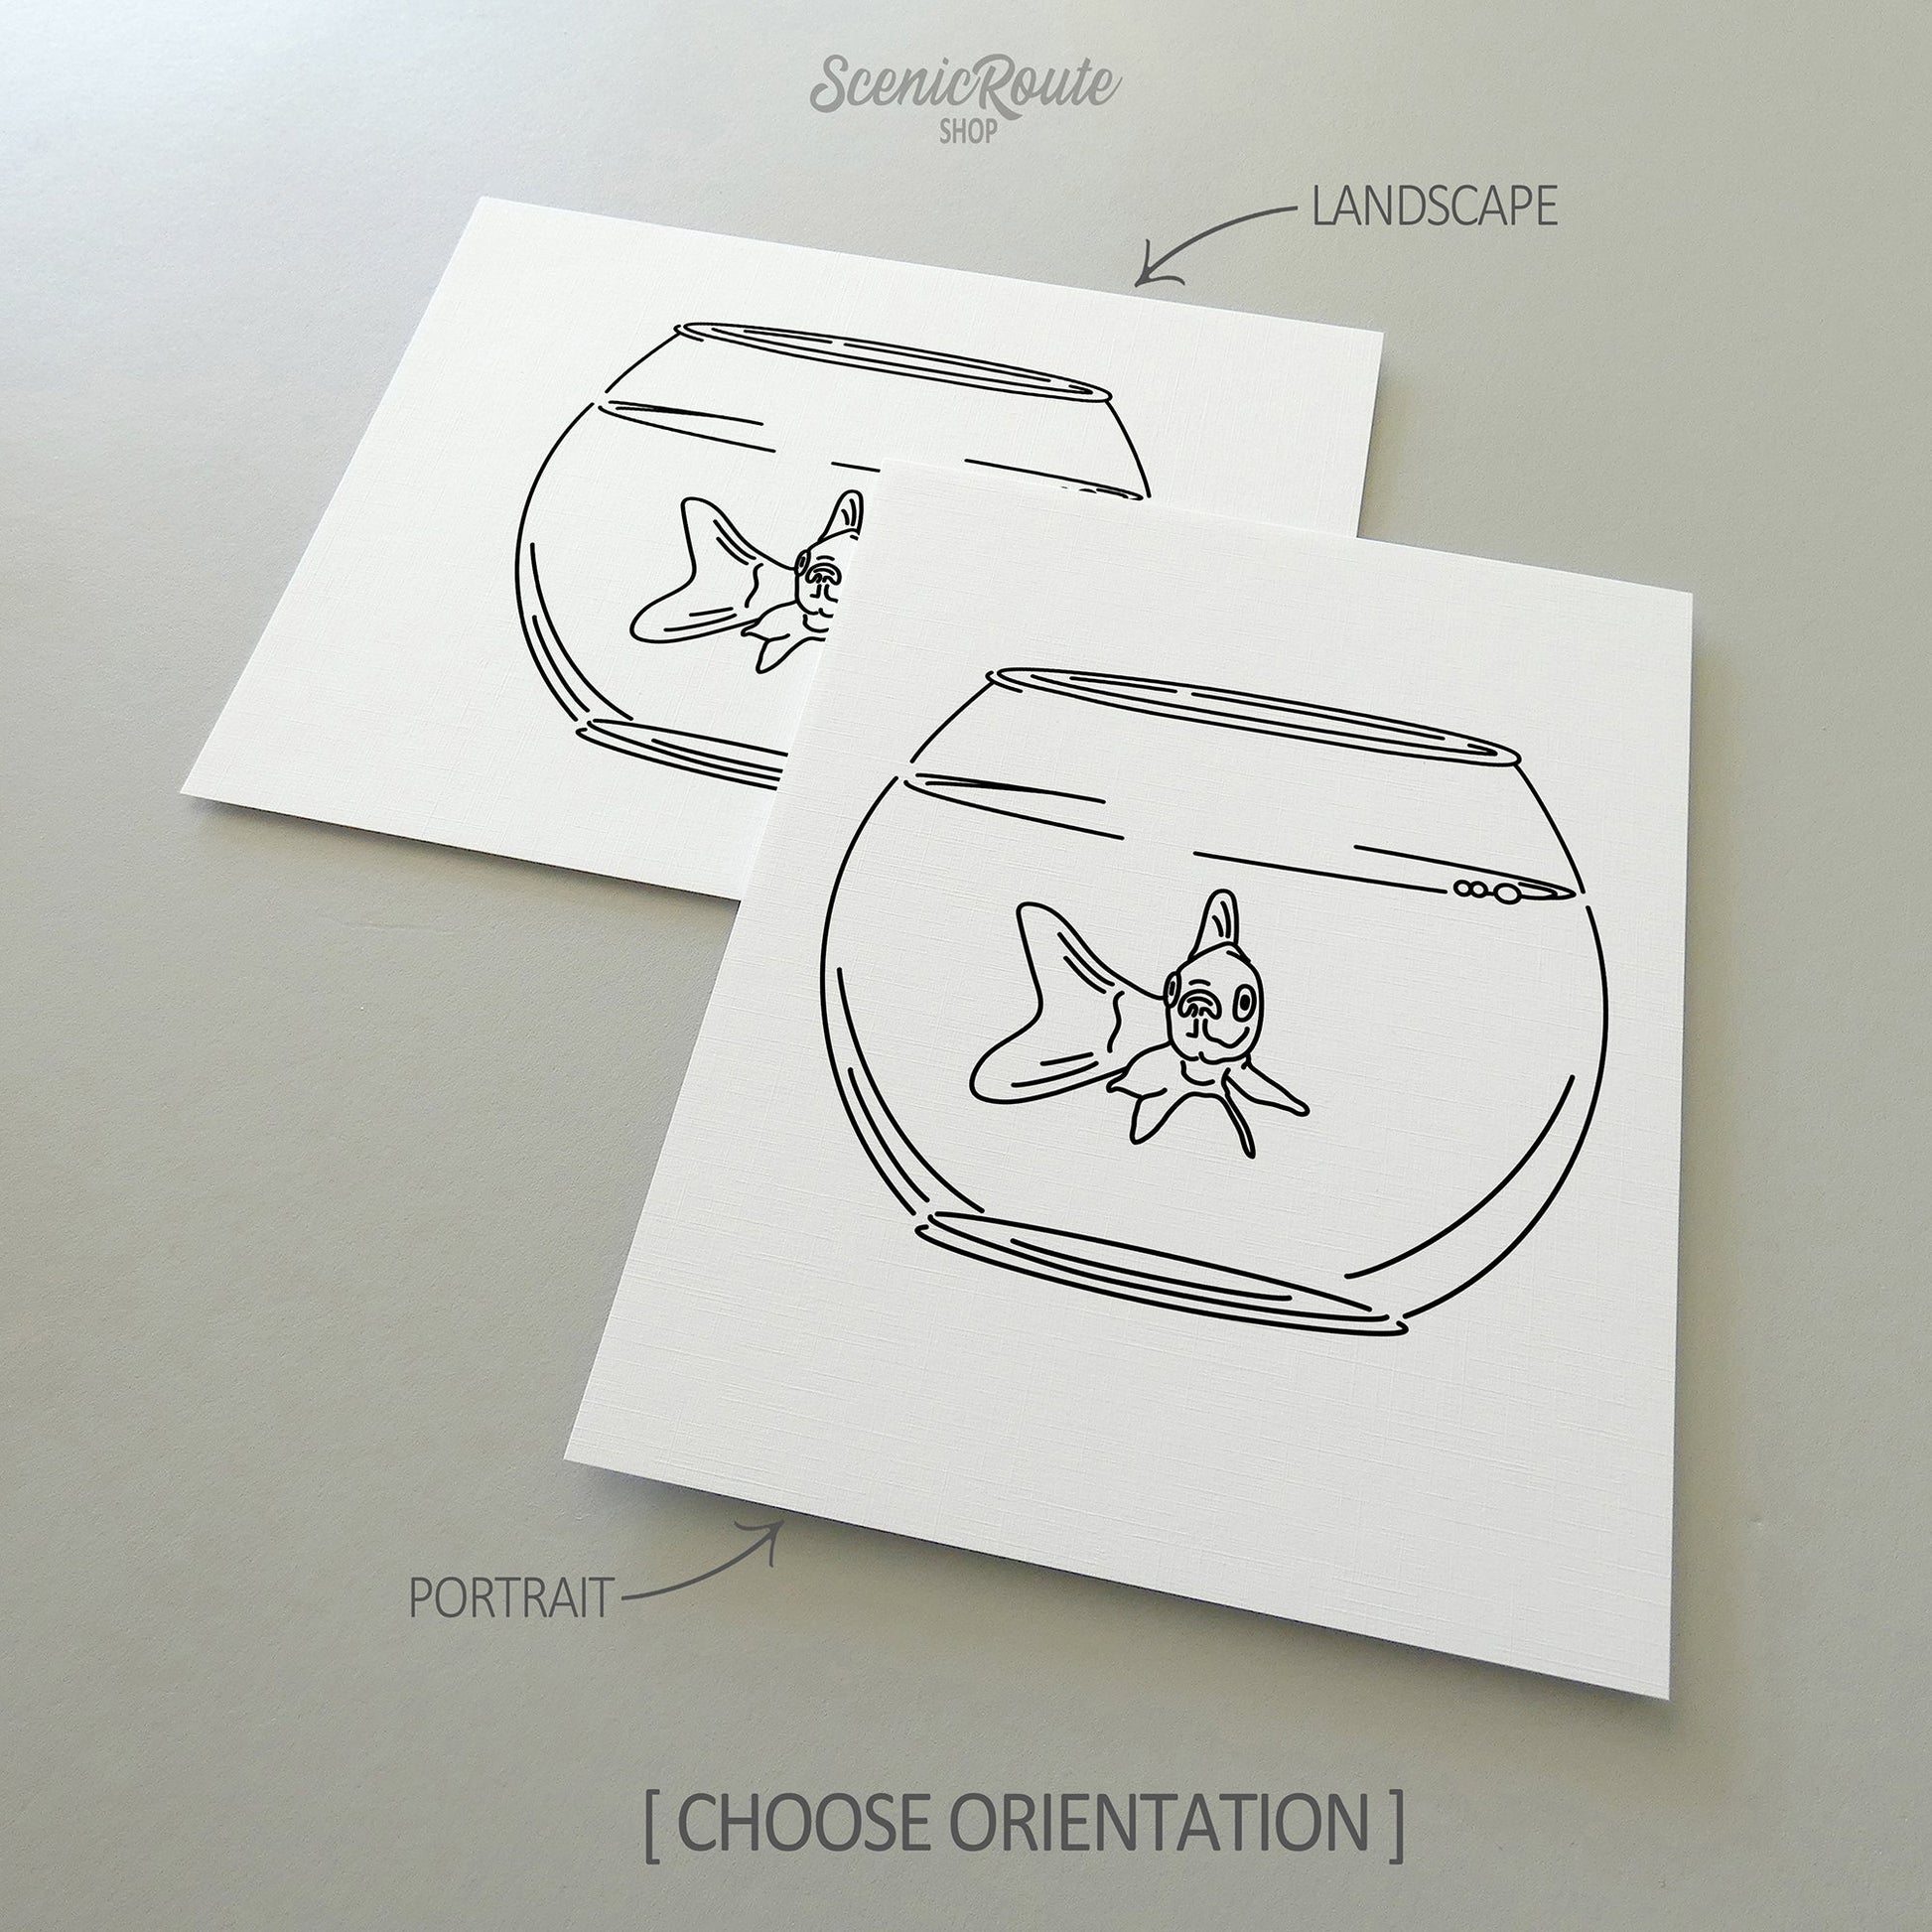 Two line art drawings of a Goldfish on white linen paper with a gray background.  The pieces are shown in portrait and landscape orientation for the available art print options.